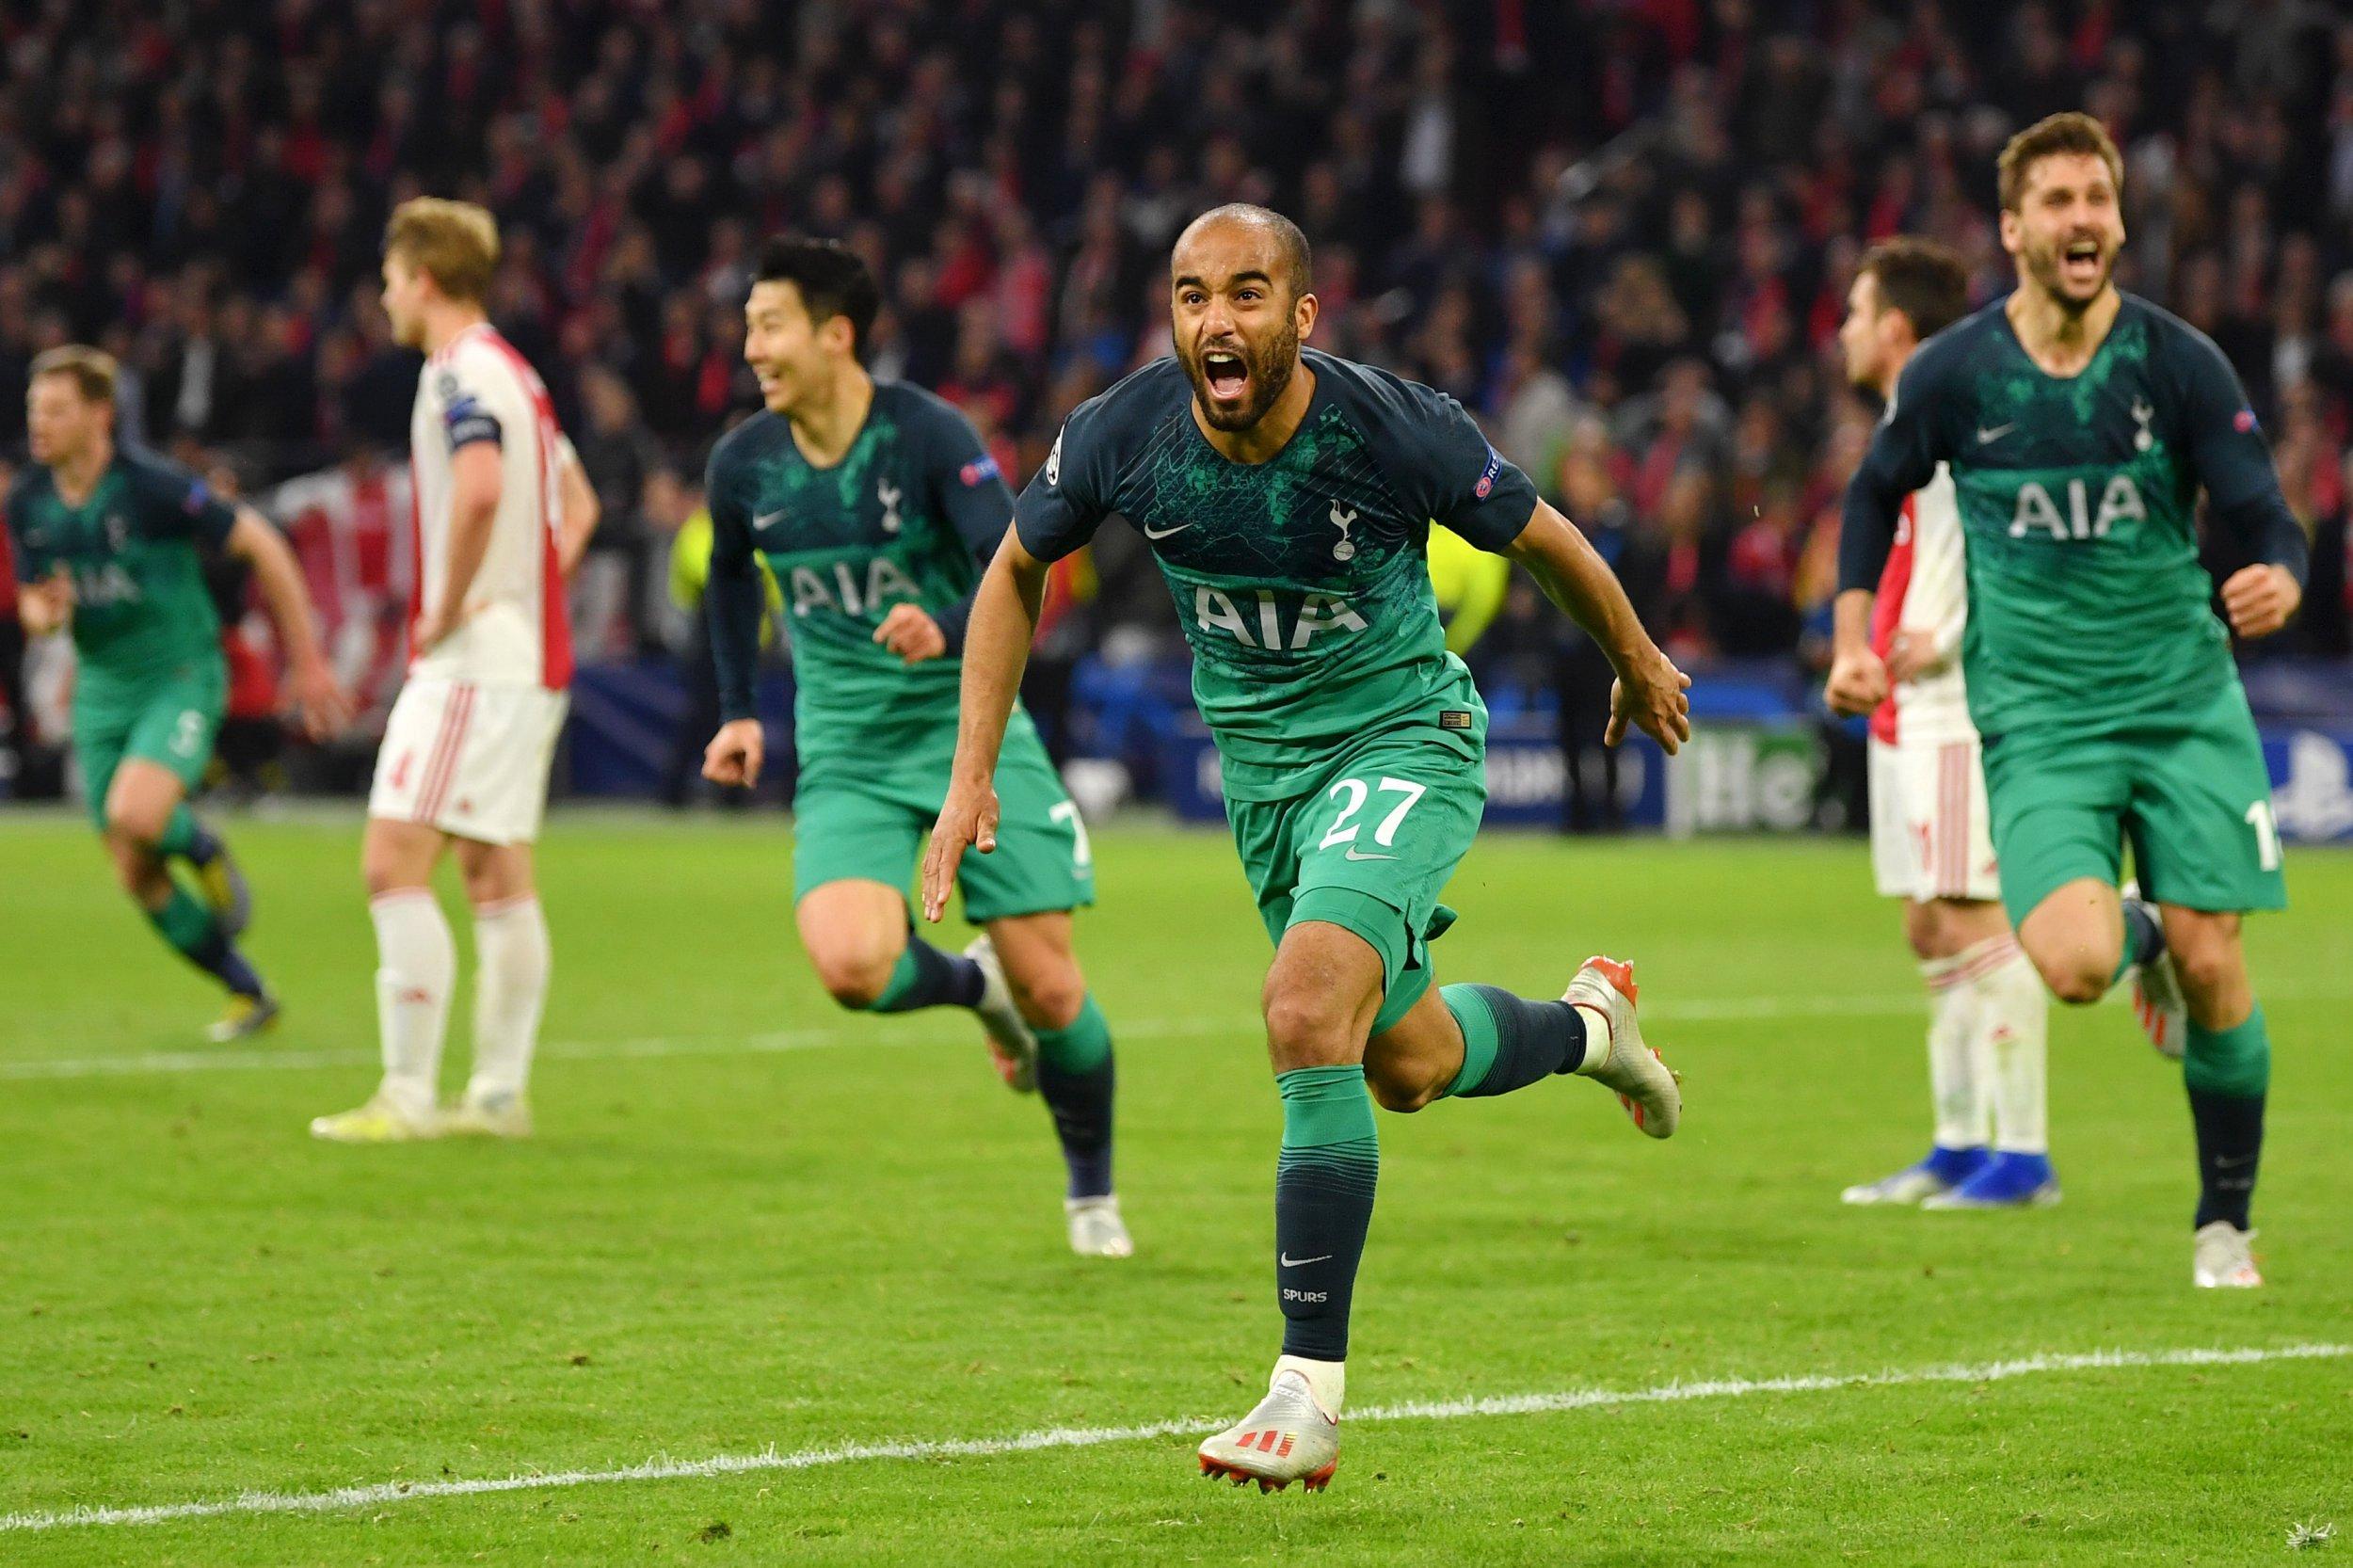 Tottenham complete incredible comeback against Ajax to reach